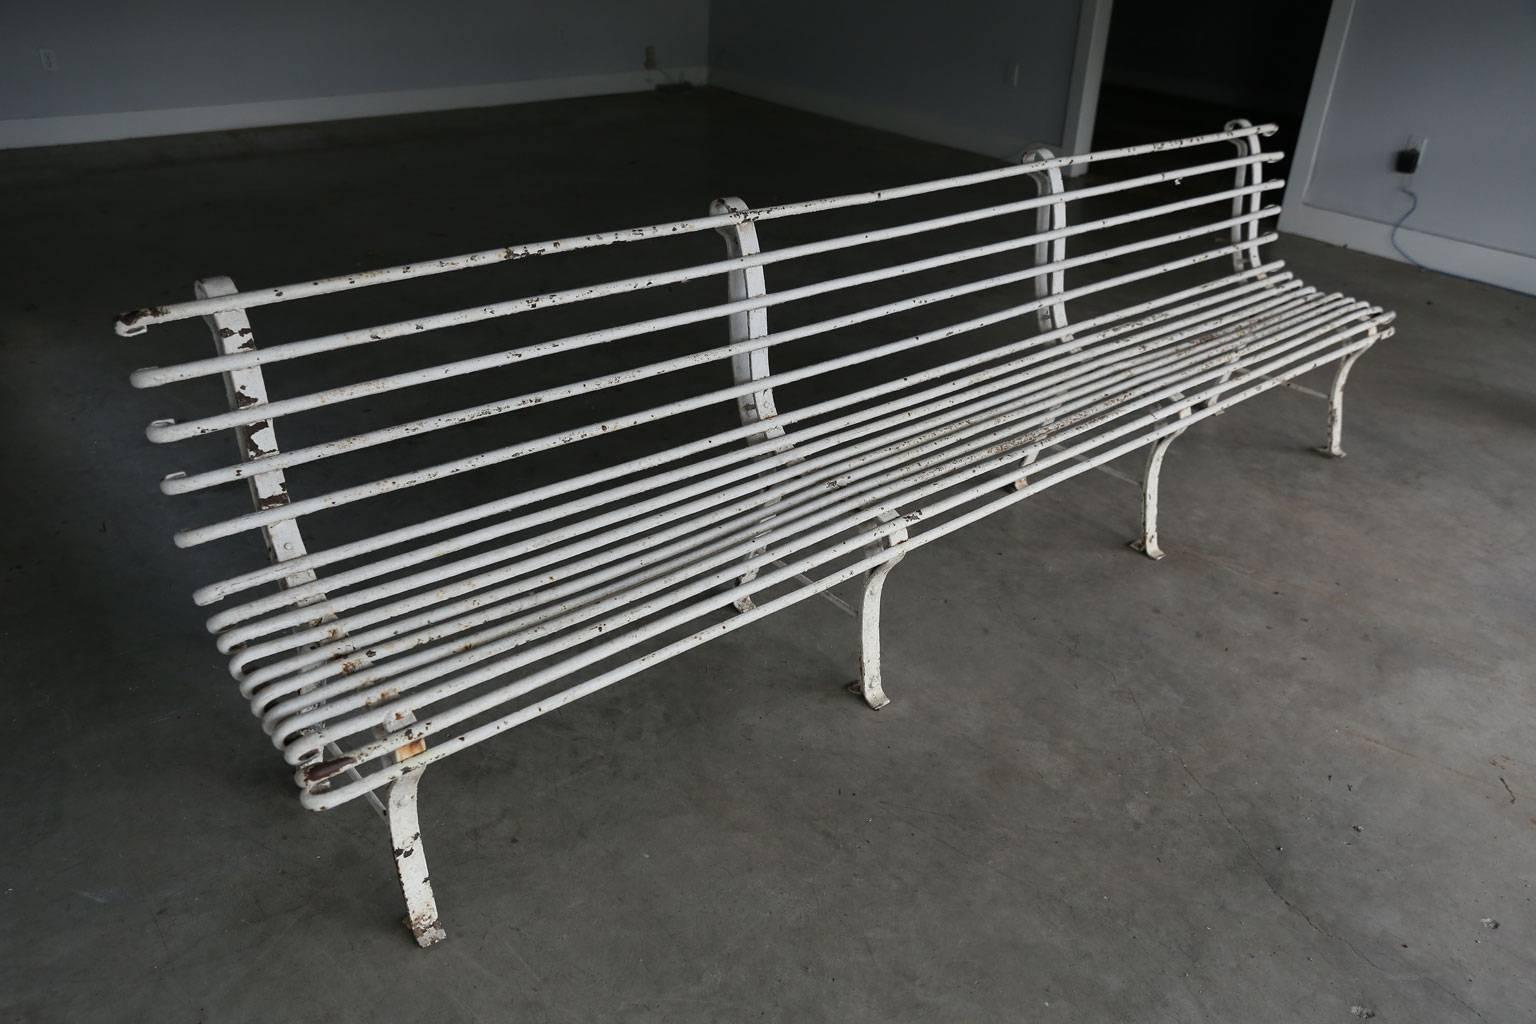 Long French iron bench in early white paint. Excellent example of early 20th century quality French cast and wrought iron. In stabile, sturdy good condition and a nice heavy weight. Ready to be installed in your garden or outdoor space.